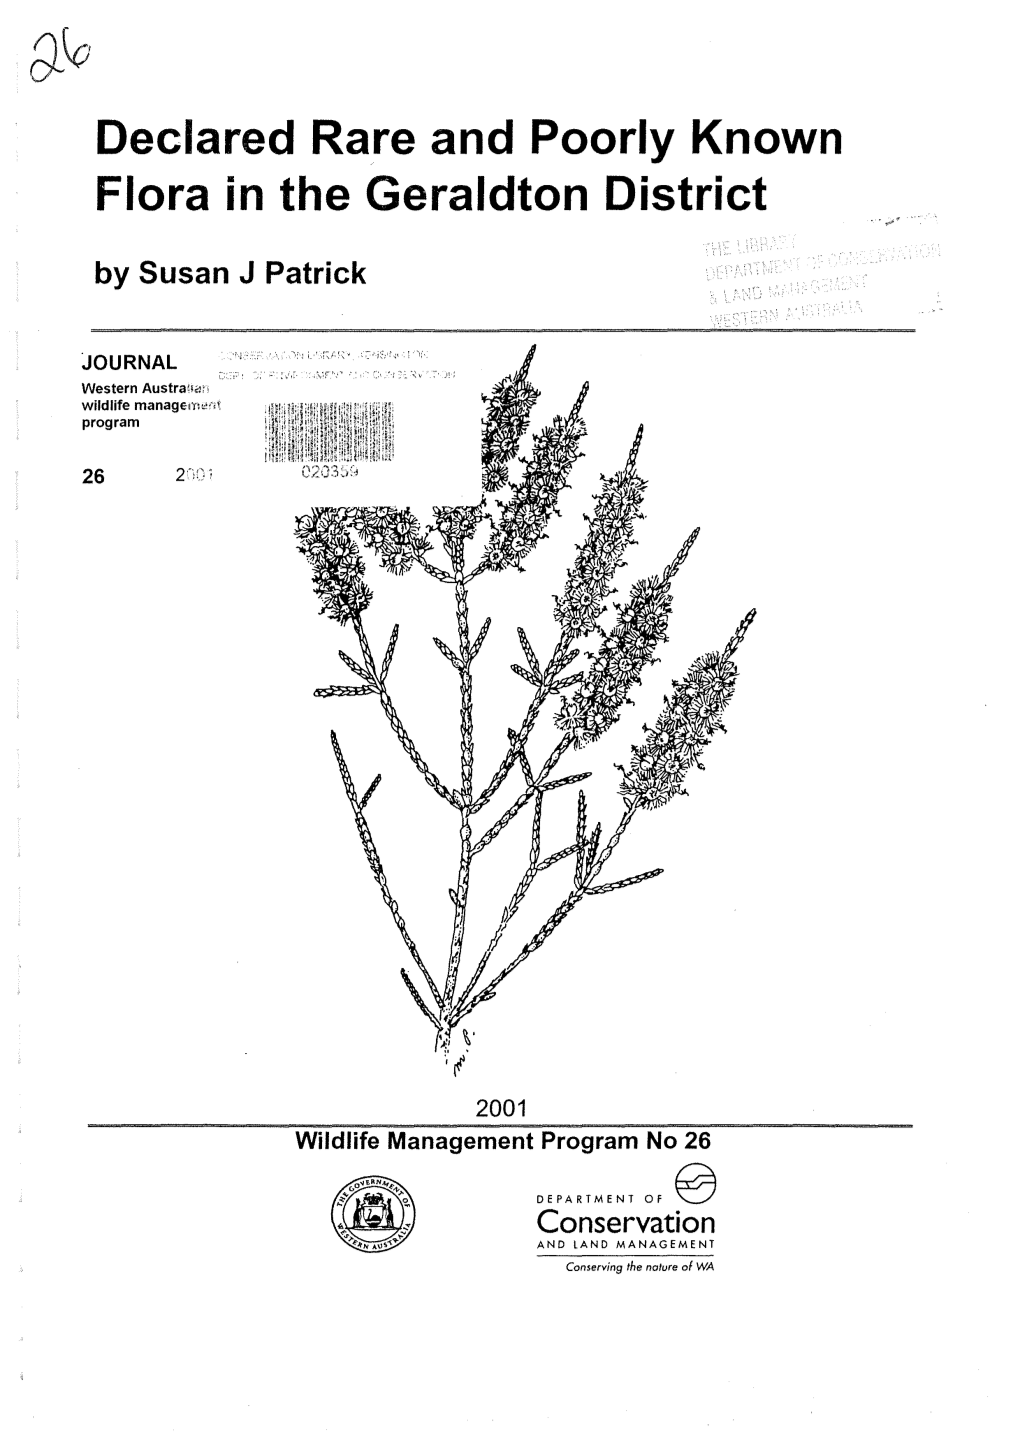 Declared Rare and Poorly Known Flora in the Geraldton District by Susan J Patrick